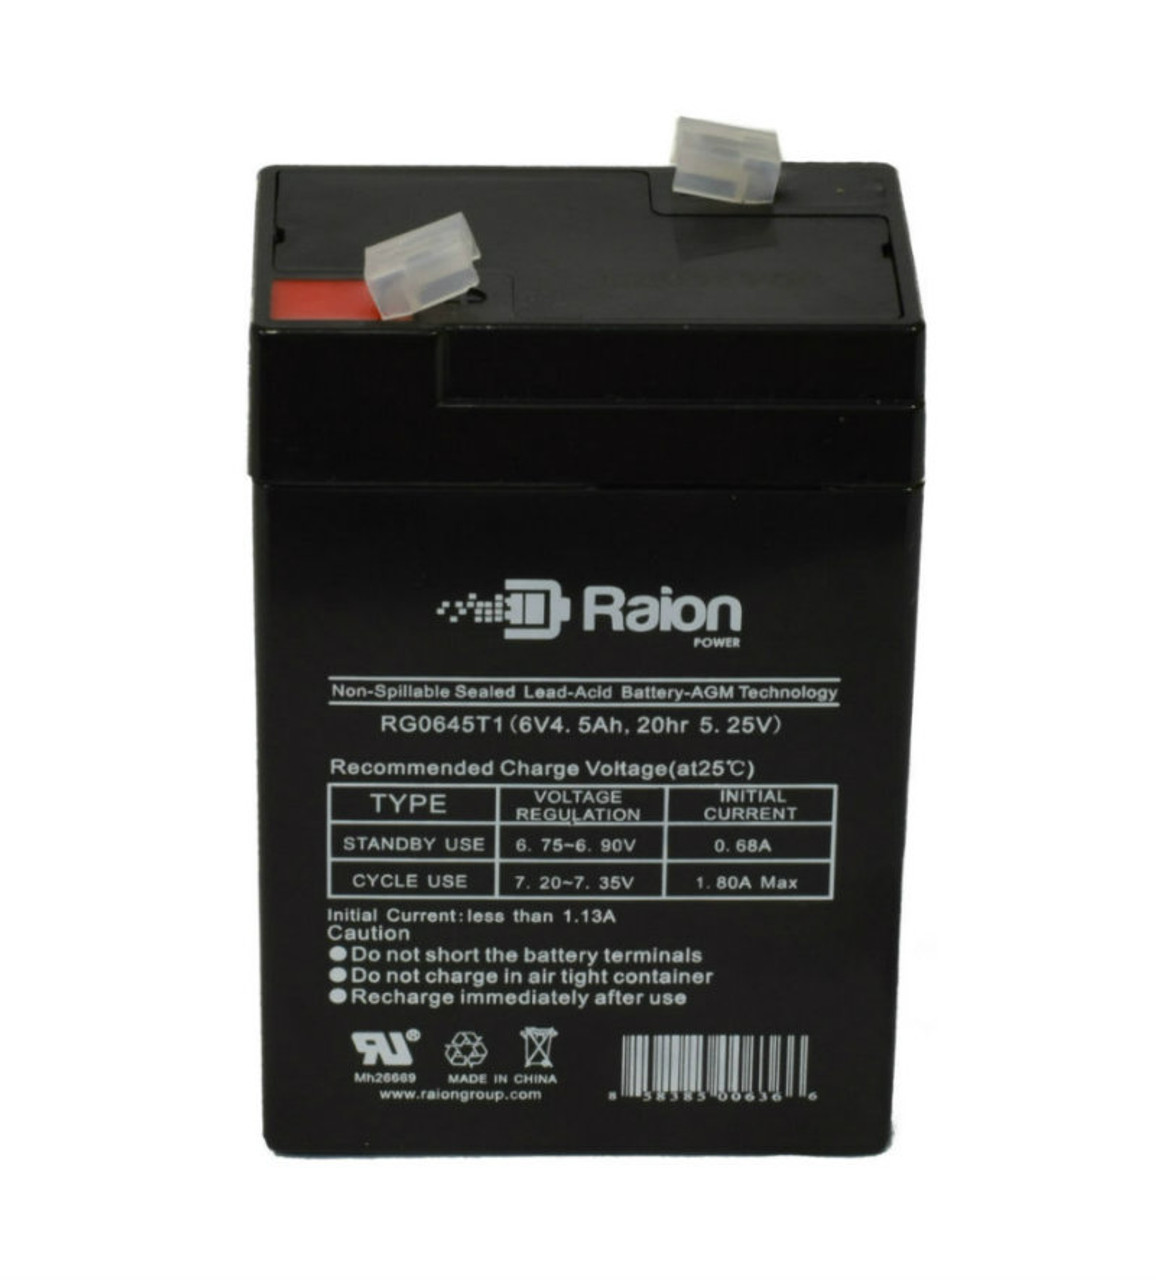 Raion Power RG0645T1 Replacement Battery Cartridge for Raythunder NP4.5-6